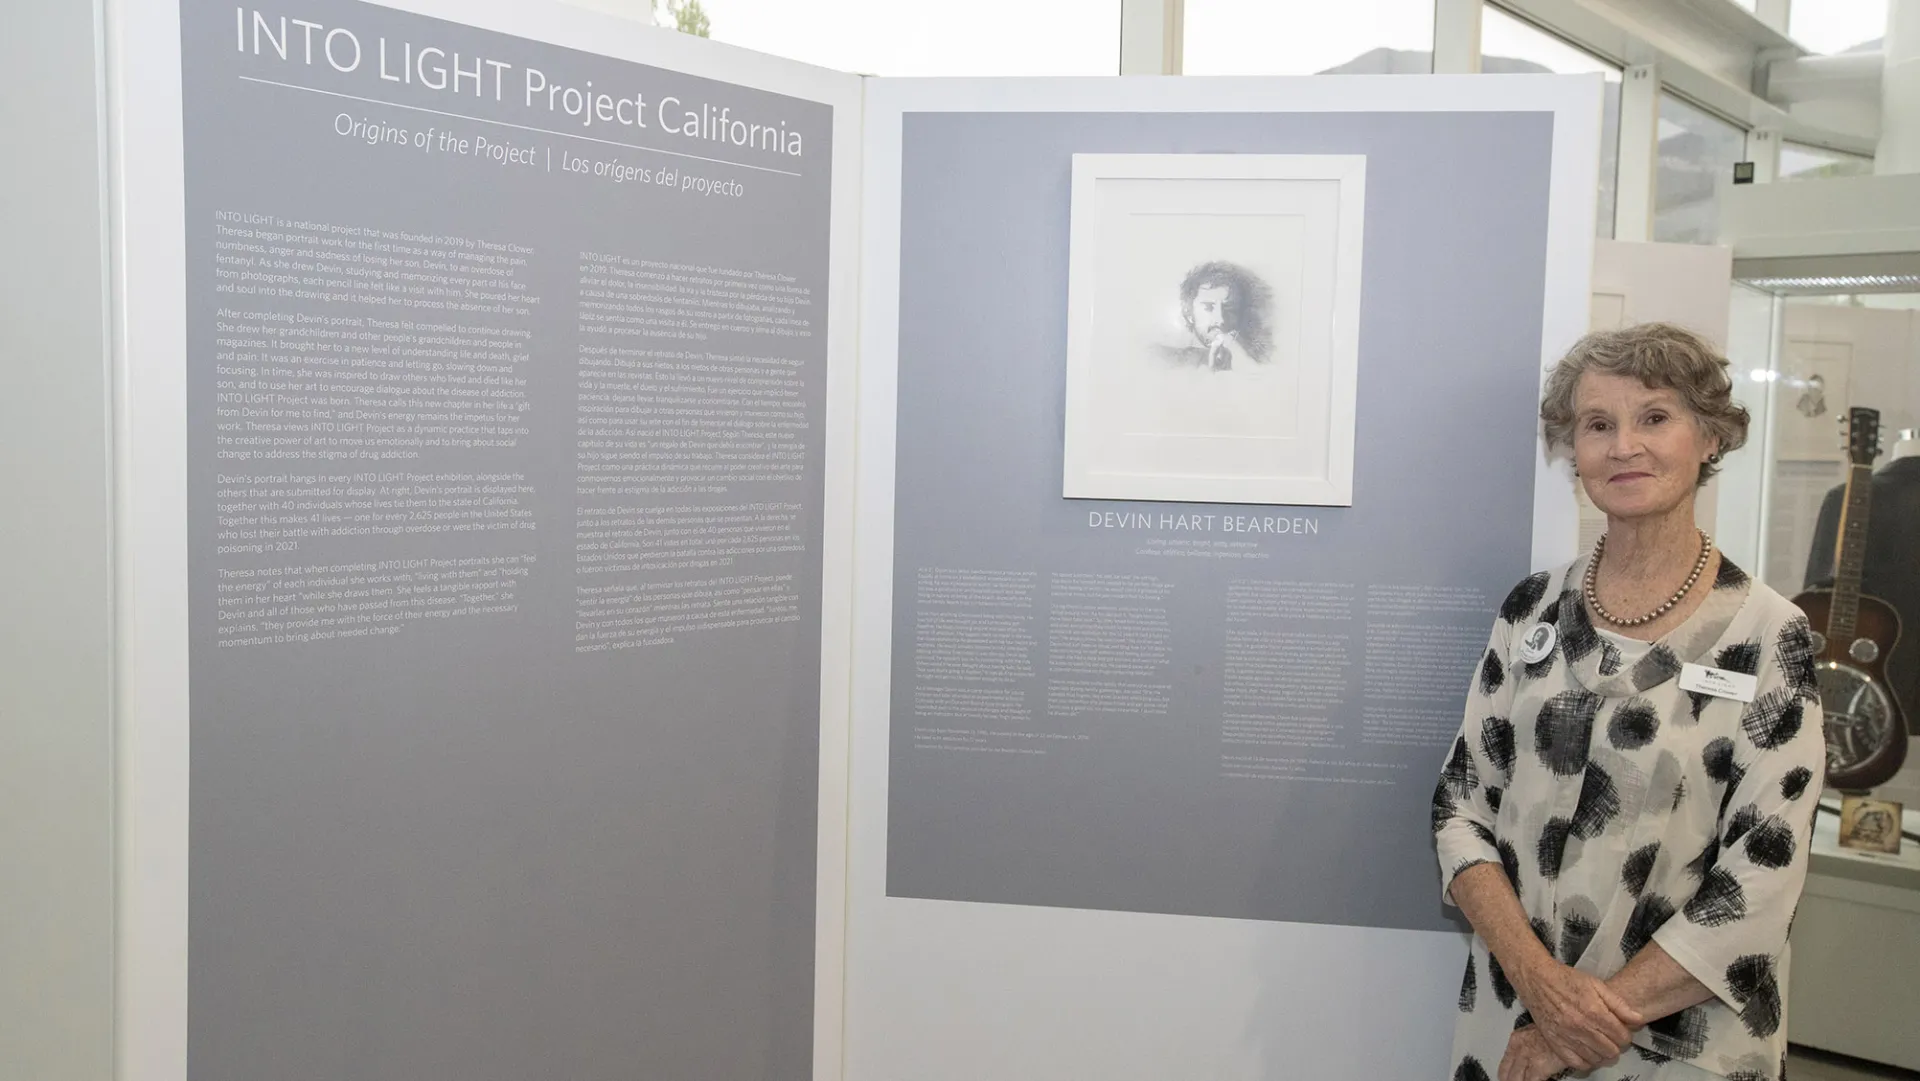 Theresa Clower, standing by her portrait of her son, Devin, started the INTO LIGHT Project. After completing Devin’s portrait, she was inspired to find others who lived and died like her son and to show the extent of the drug epidemic through exhibits involving each state.